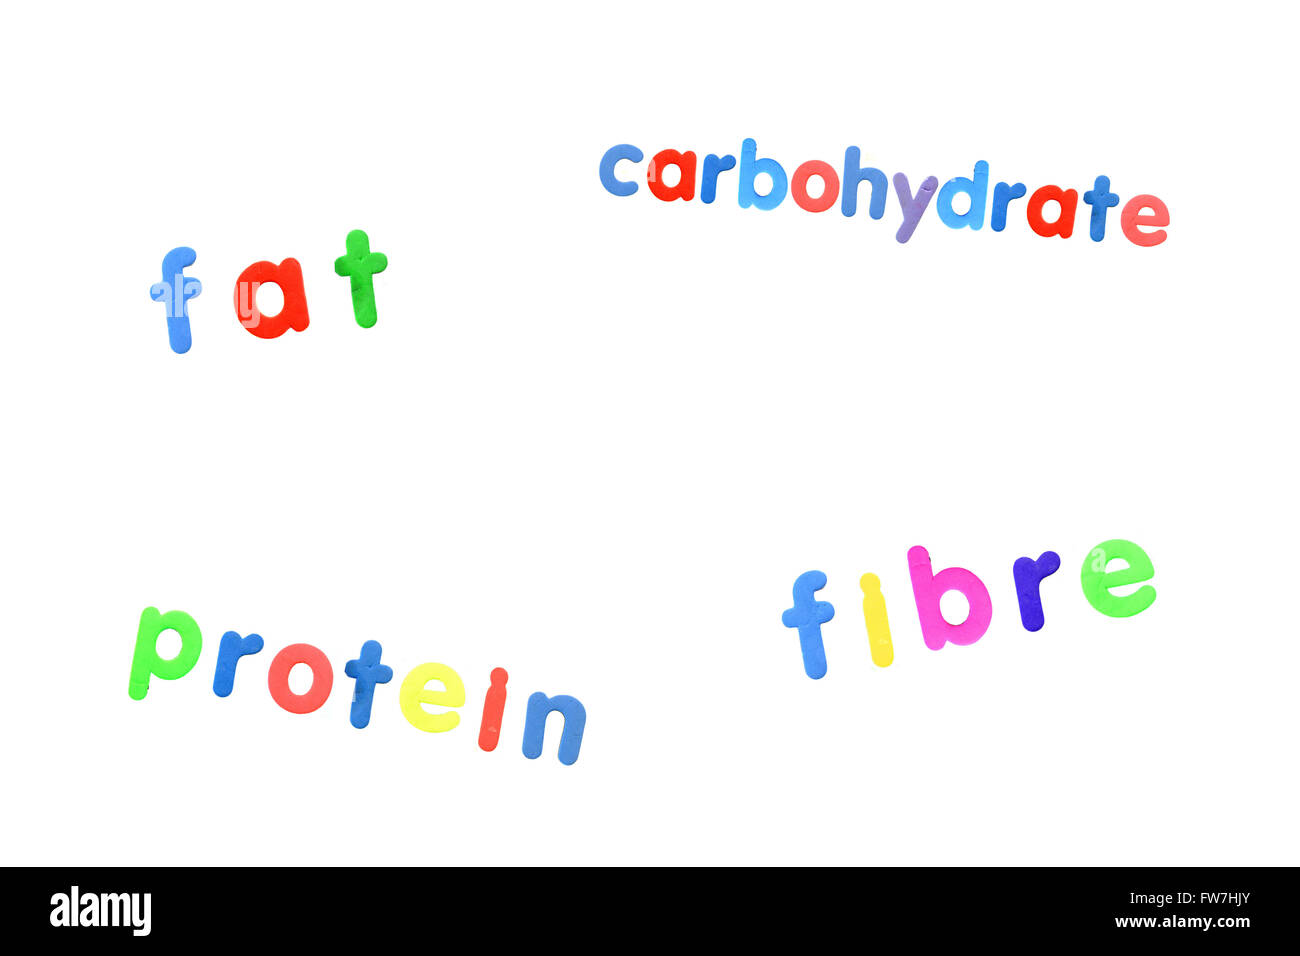 Fat, Carbohydrate, Protein and Fibre created from magnetic fridge alphabet pieces photographed against a white background. Stock Photo